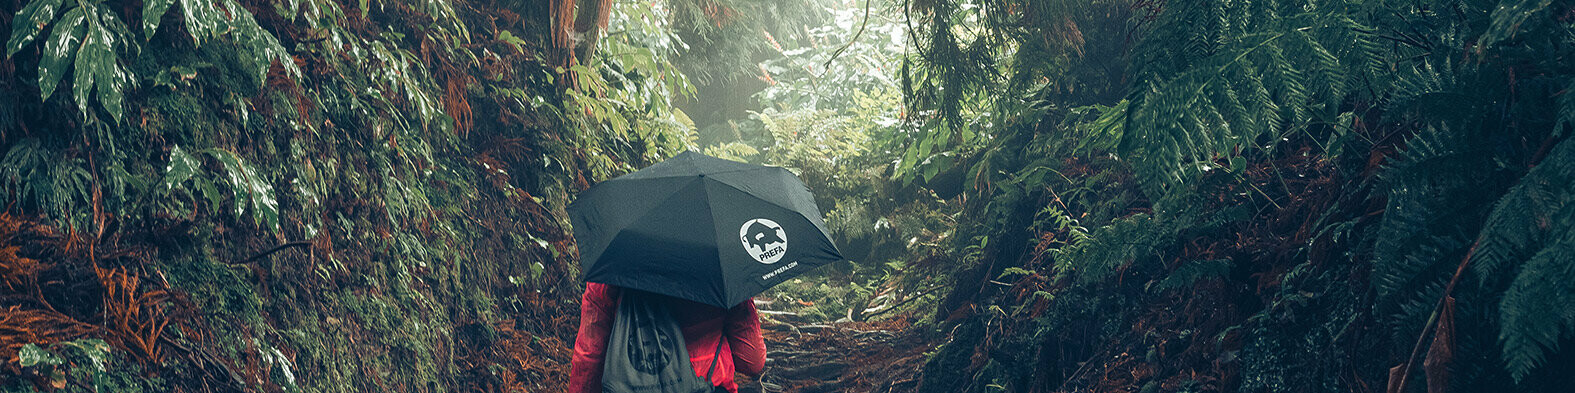 Image of a forest with a female hiker in a red jacket with a PREFA umbrella and gym bag, symbolises PREFA’s environmental protection and sustainability, as well as the closed-loop economy and recycling